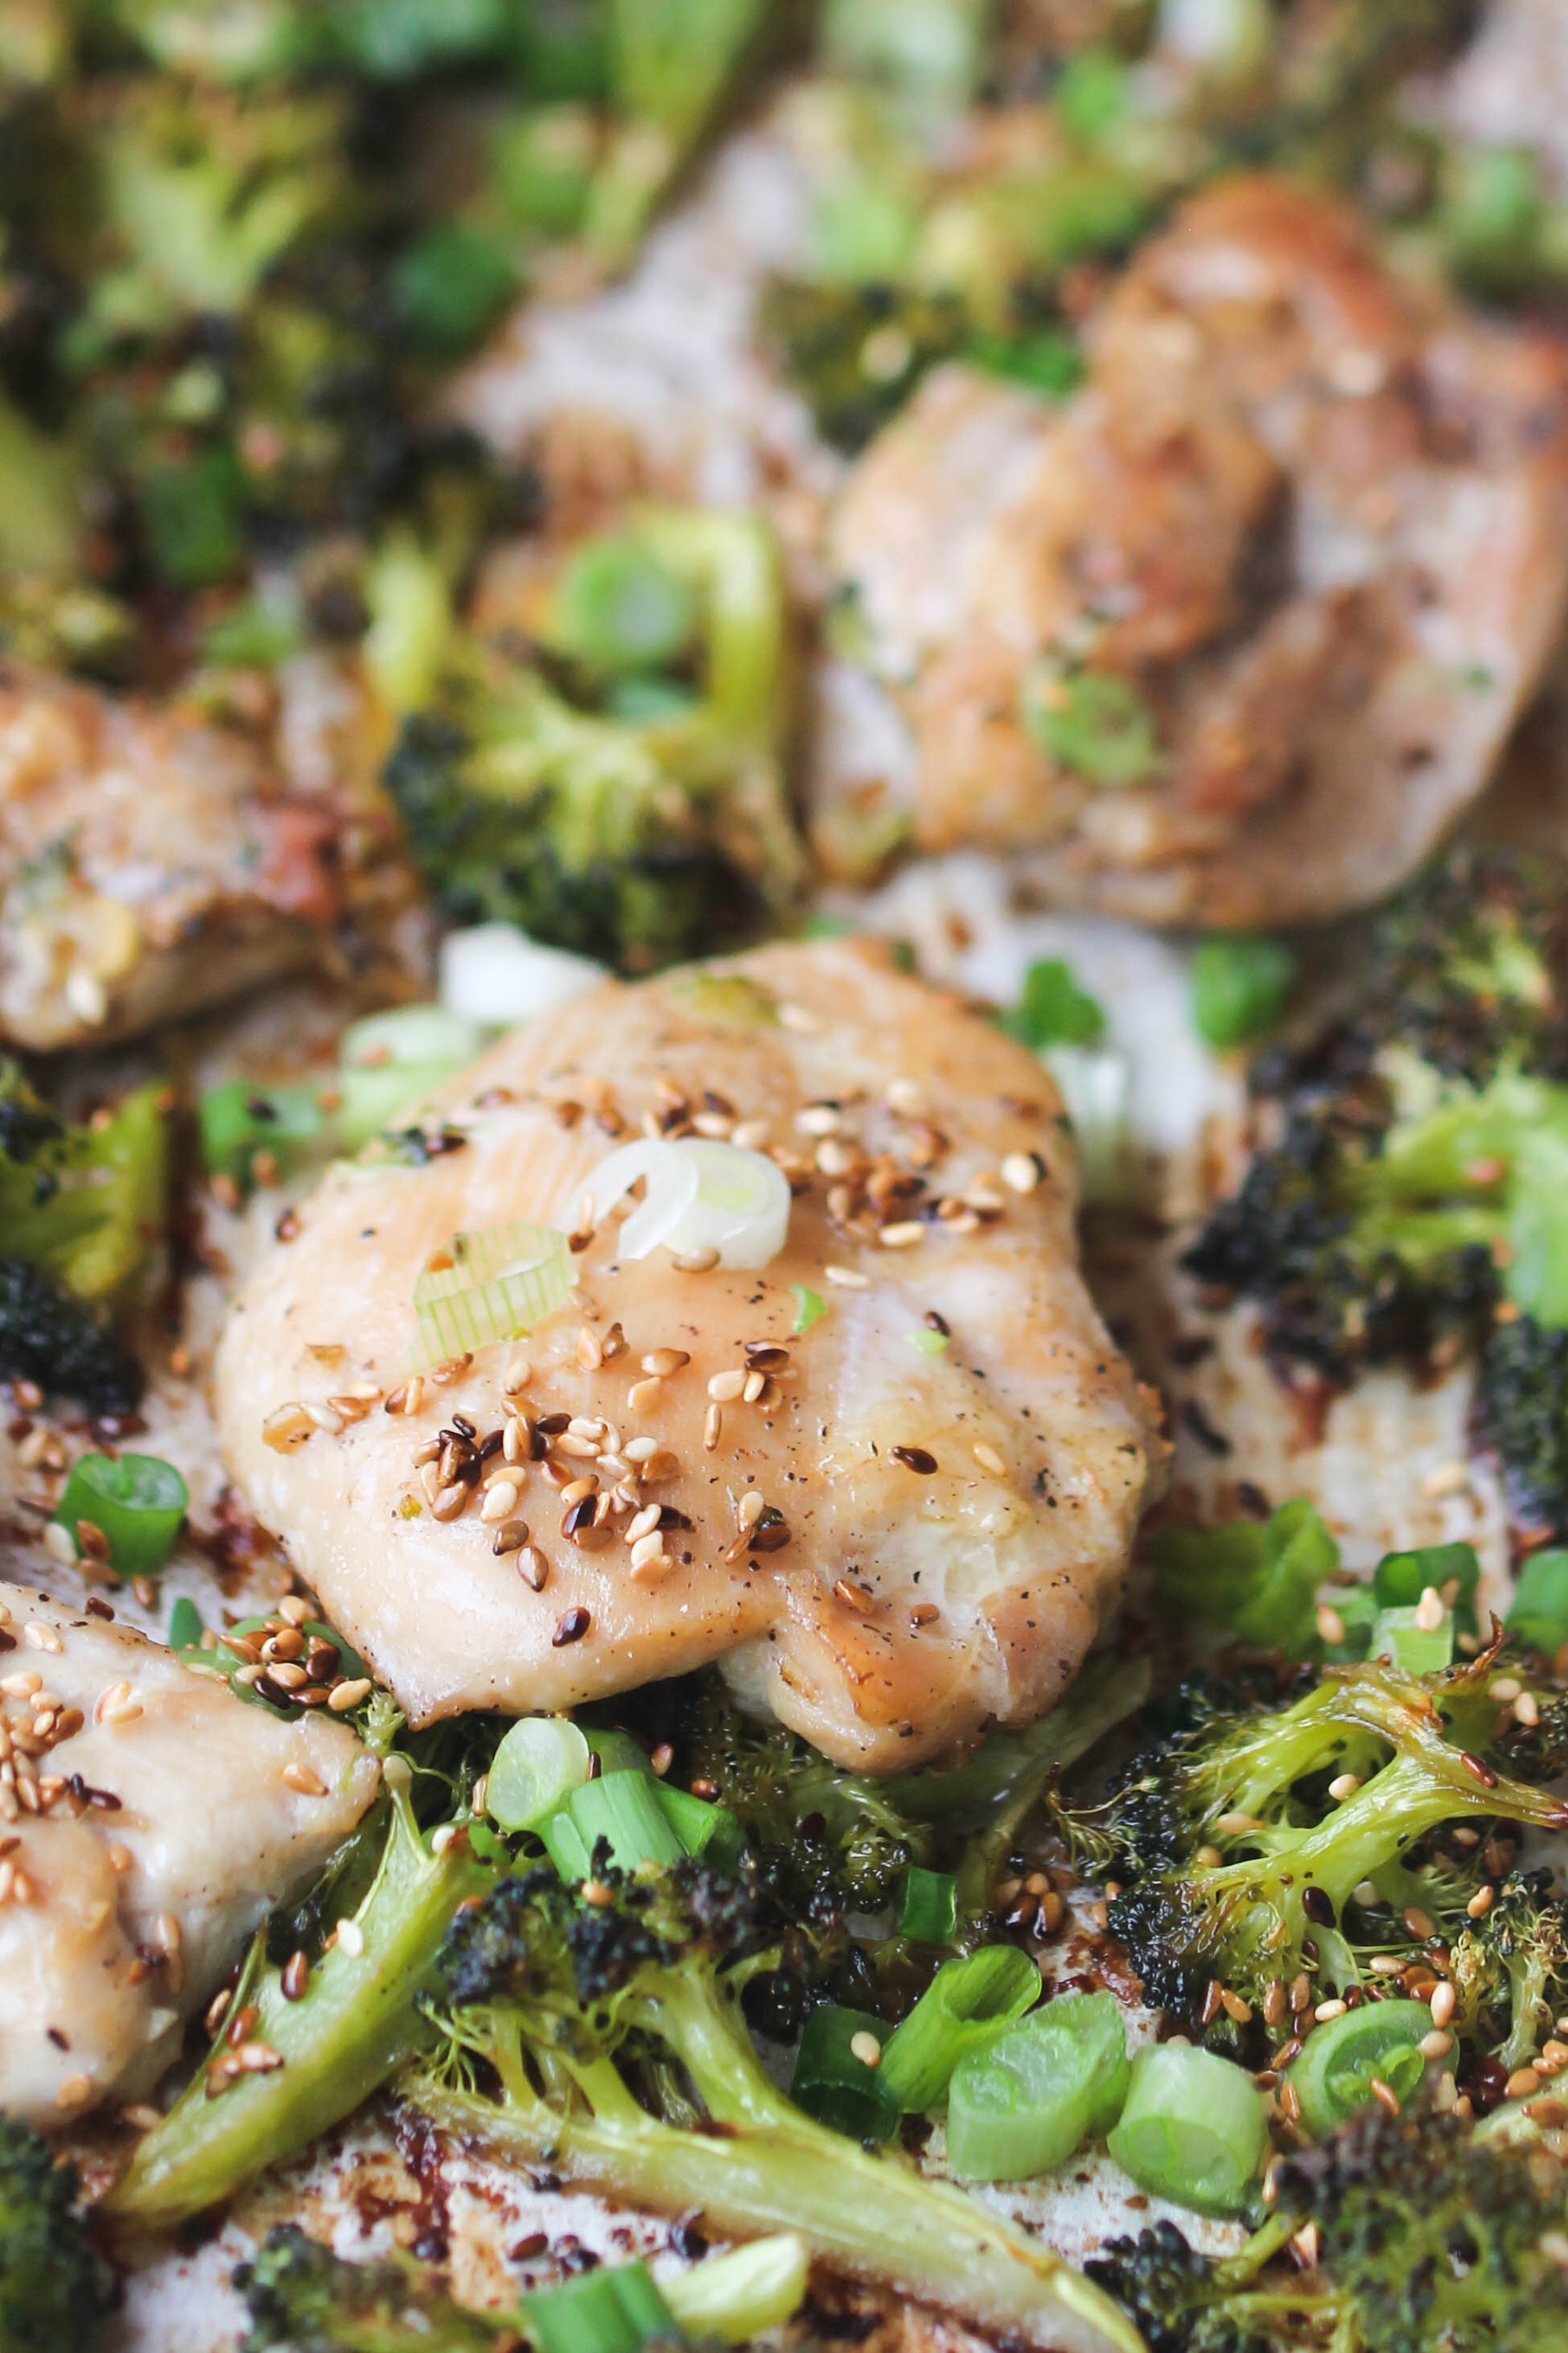 Sheet Pan Chicken and Broccoli is a perfect weeknight meal for the whole family. It uses minimal ingredients, little prep time, and requires no cleaning!